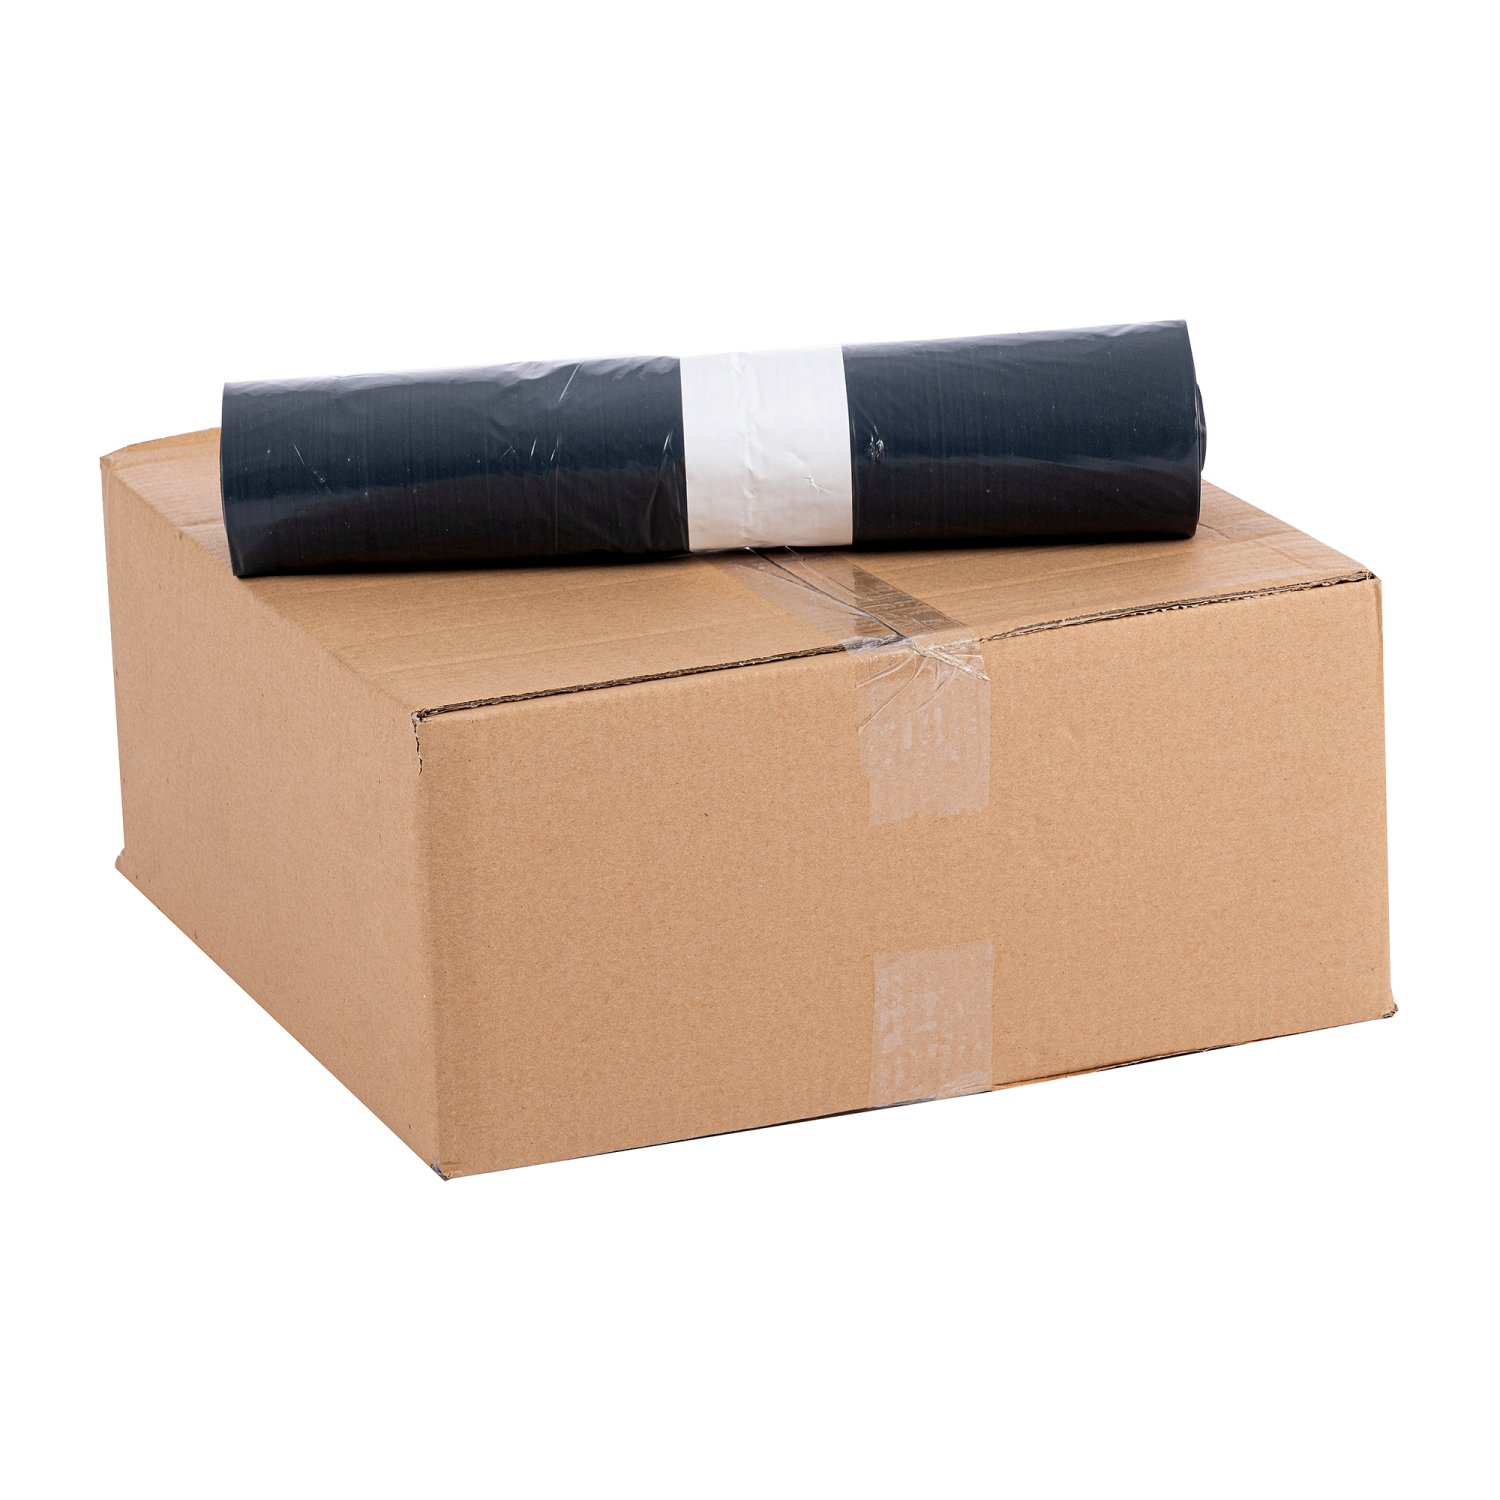 Waste bag 120 l, LDPE recyclate, 37 mu, black bag, no print, unperforated, without closing ribbon